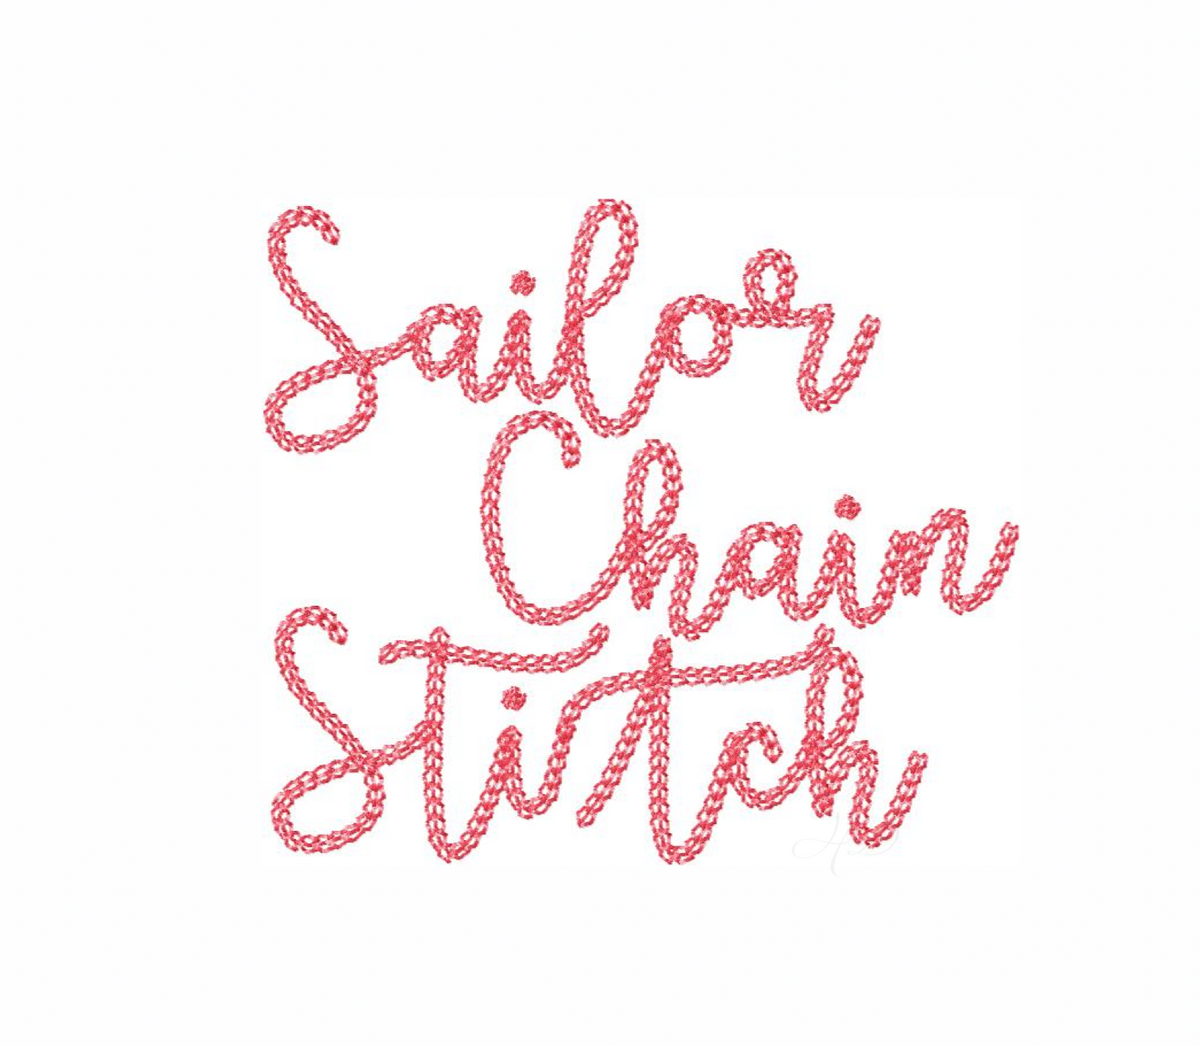 Sailor Lee Chain Stitch Embroidery Font Package – HERRINGTON DESIGN